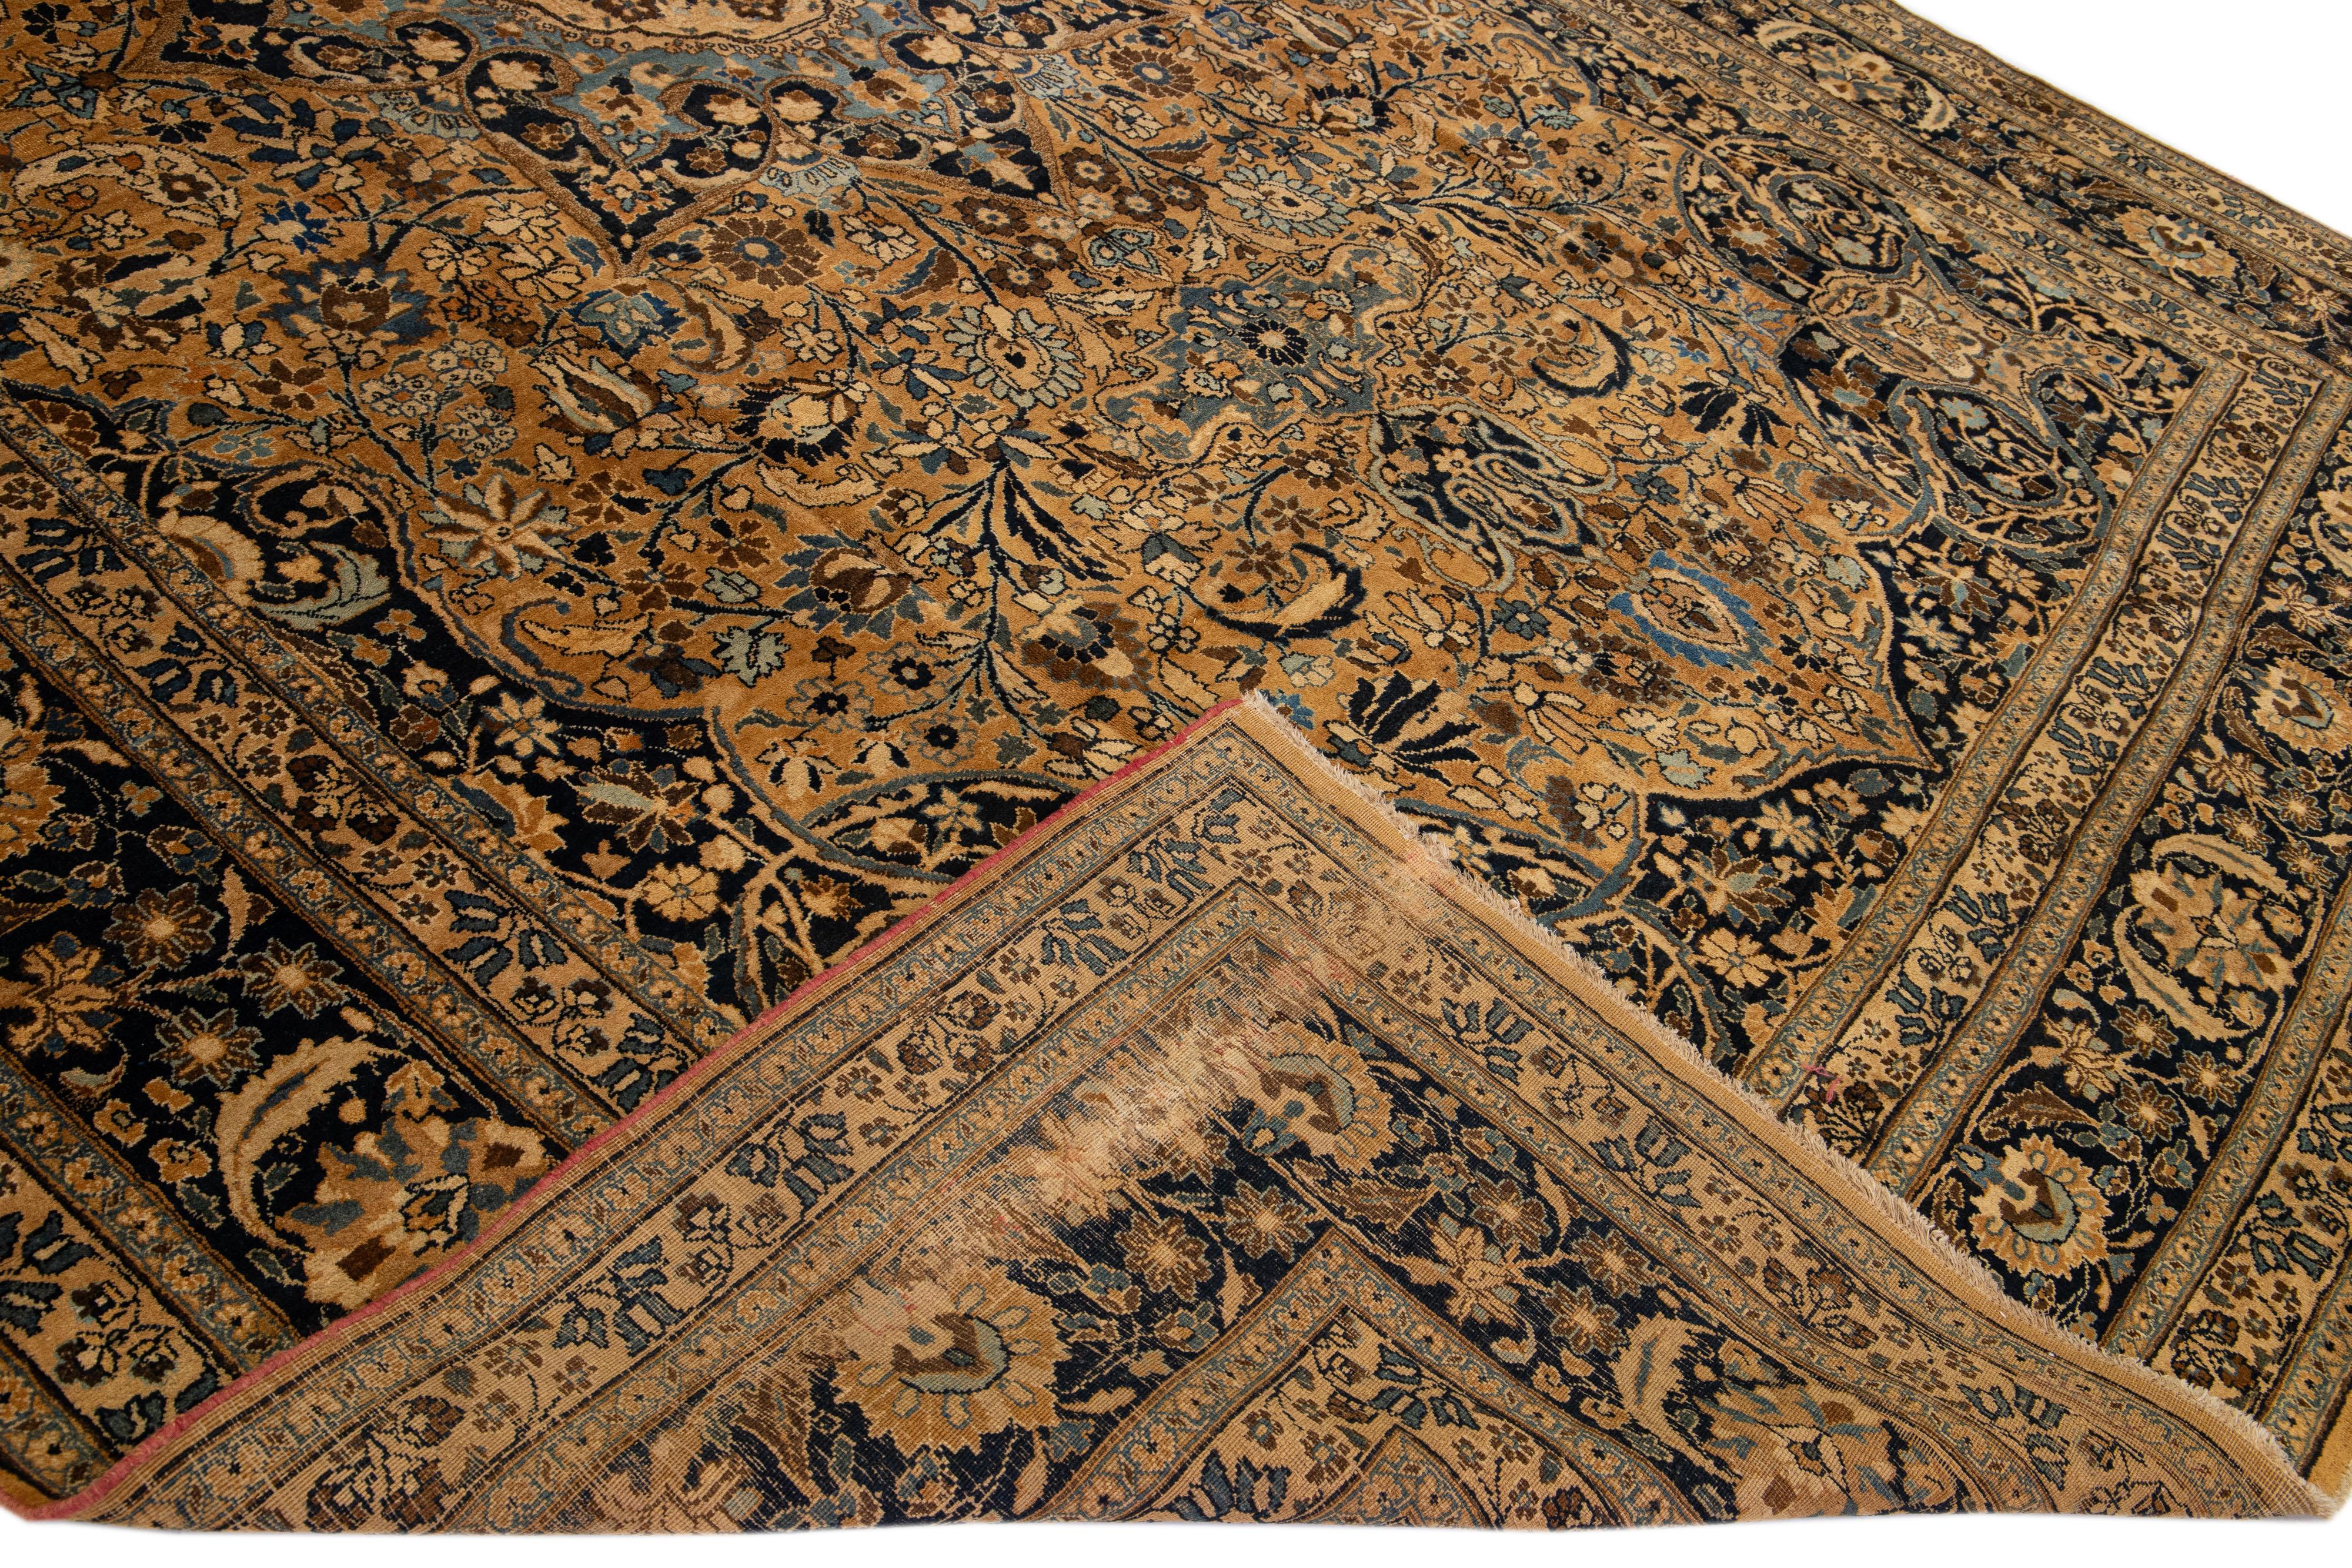 Beautiful Antique Mashad hand-knotted wool rug with a tan field. This piece rug has a blue frame and accents in a gorgeous all-over classic floral pattern design. 

This rug measures: 11' x 16'3